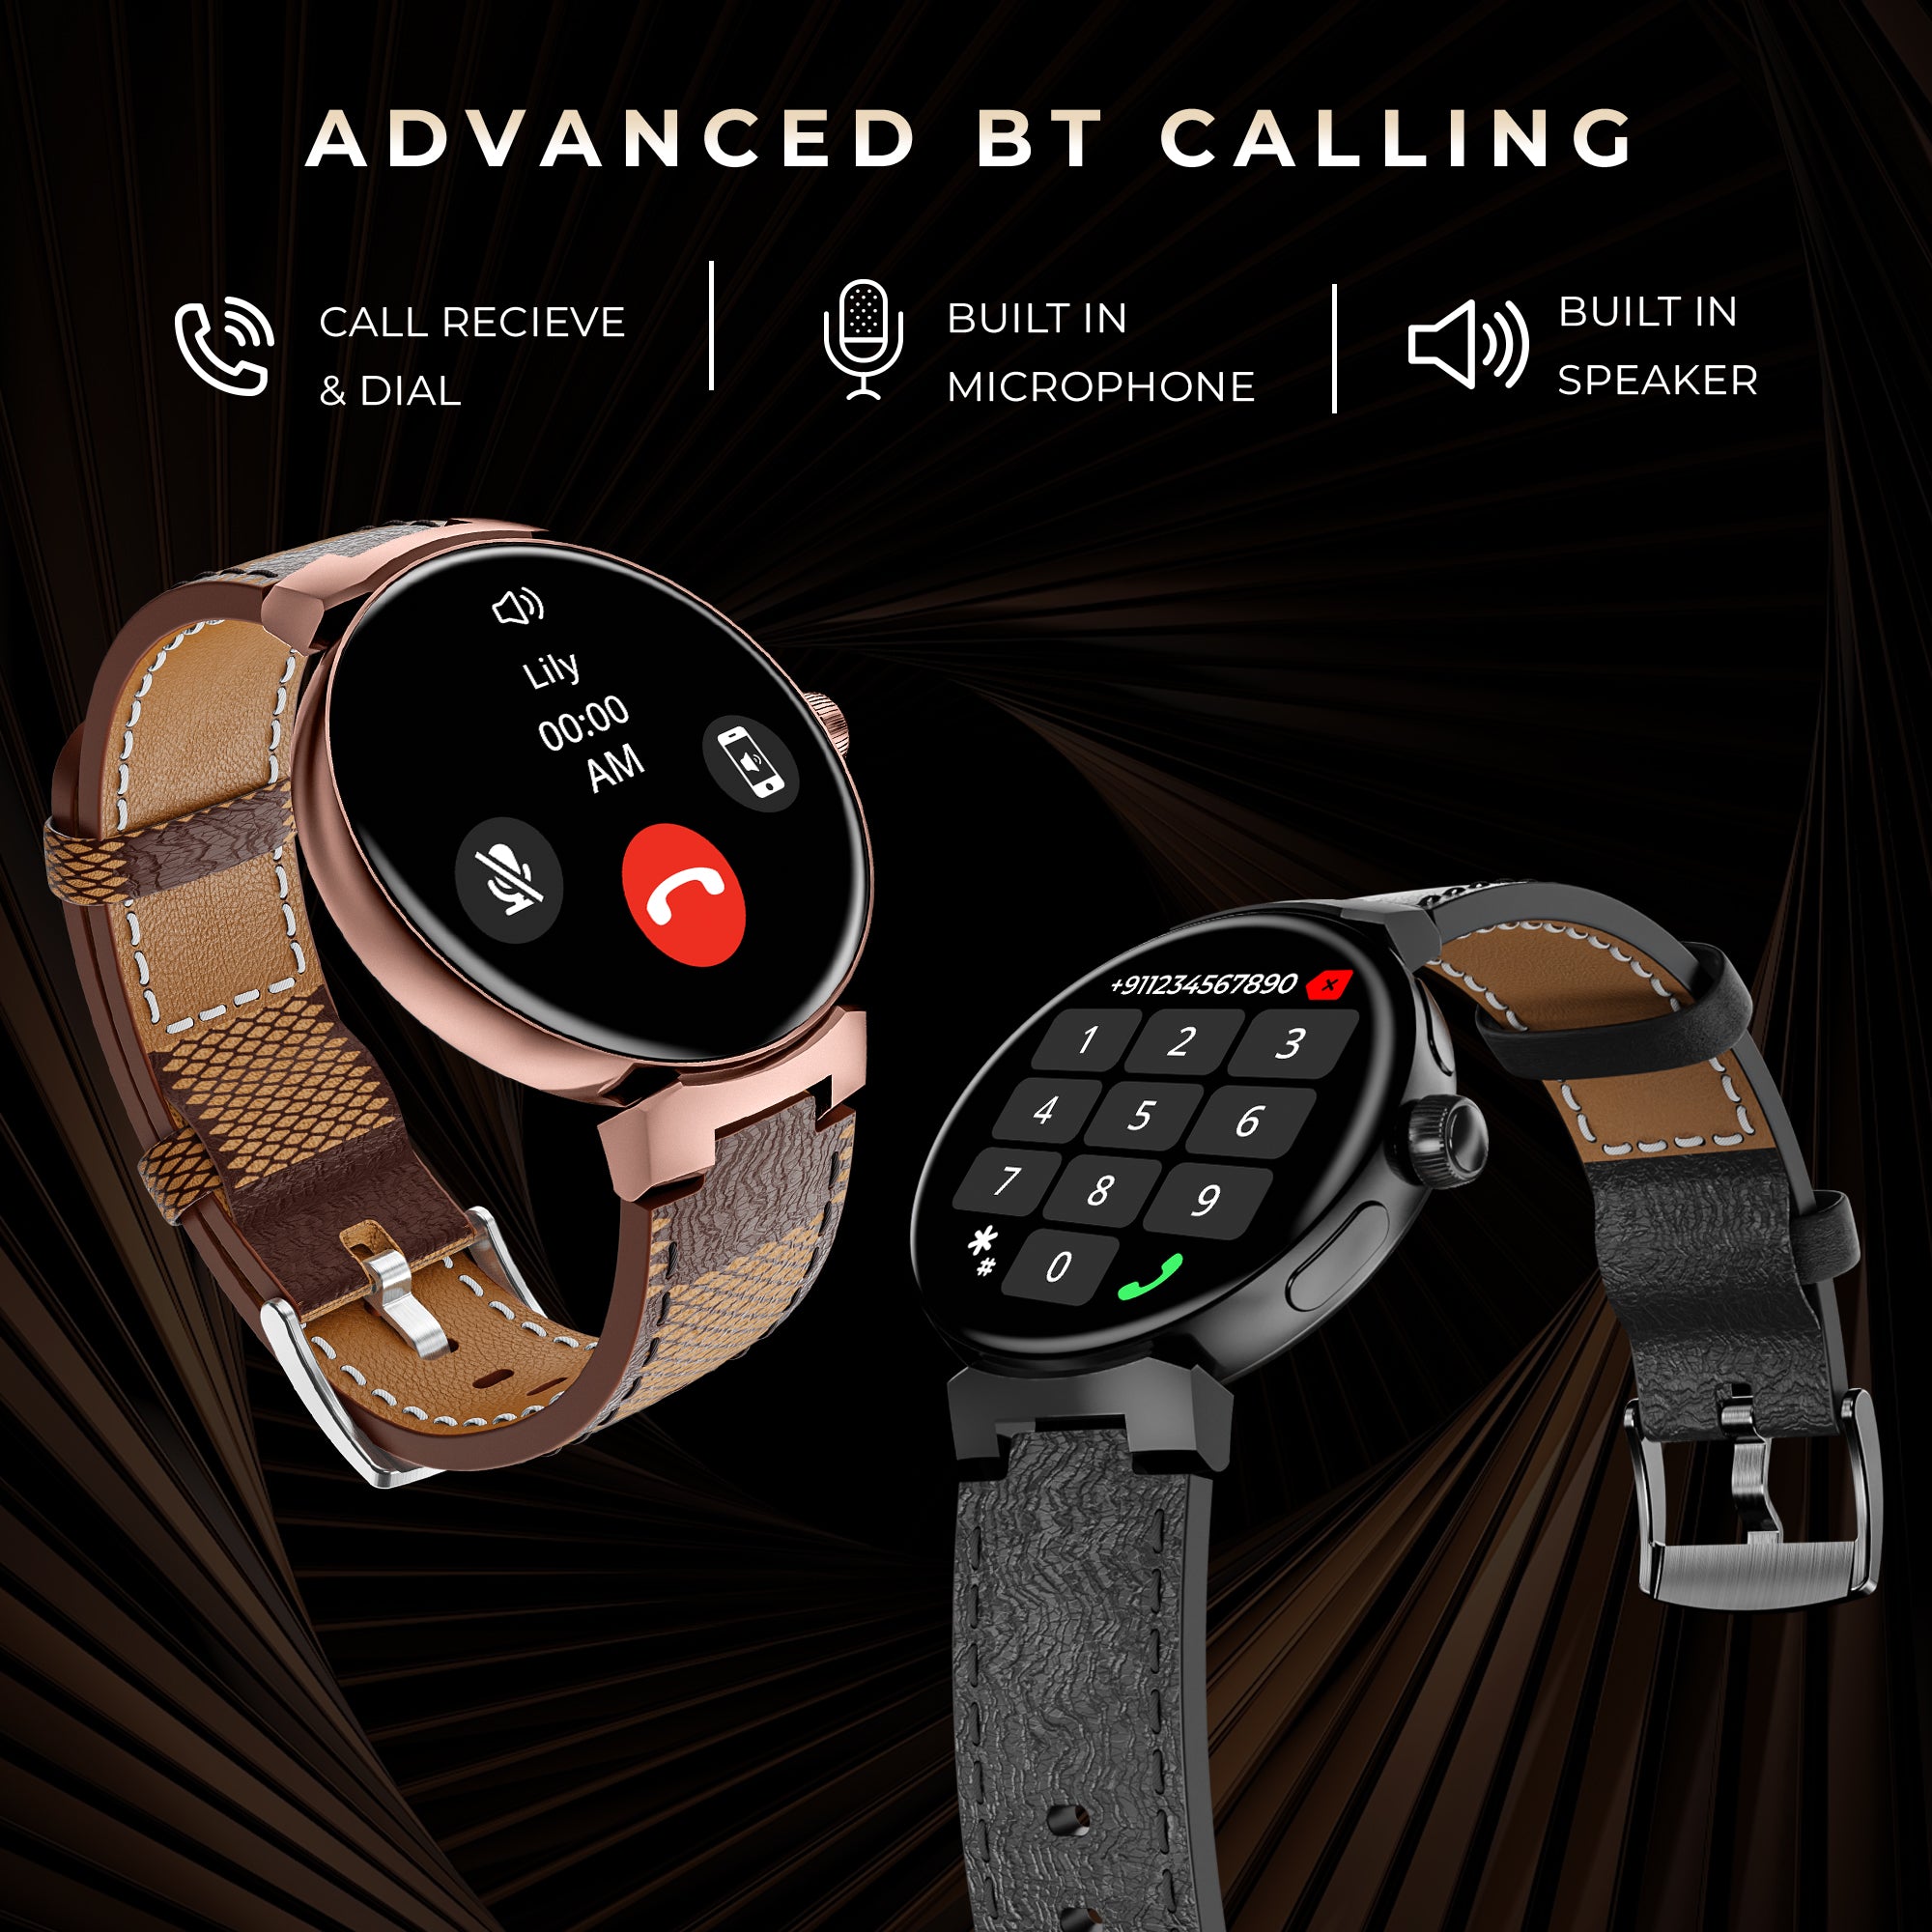 GIZMORE Prime 1.45 Inch (3.6cm) Amoled Display | AOD | 500 NITS | 10 Days Battery Life | BT Calling Smartwatch